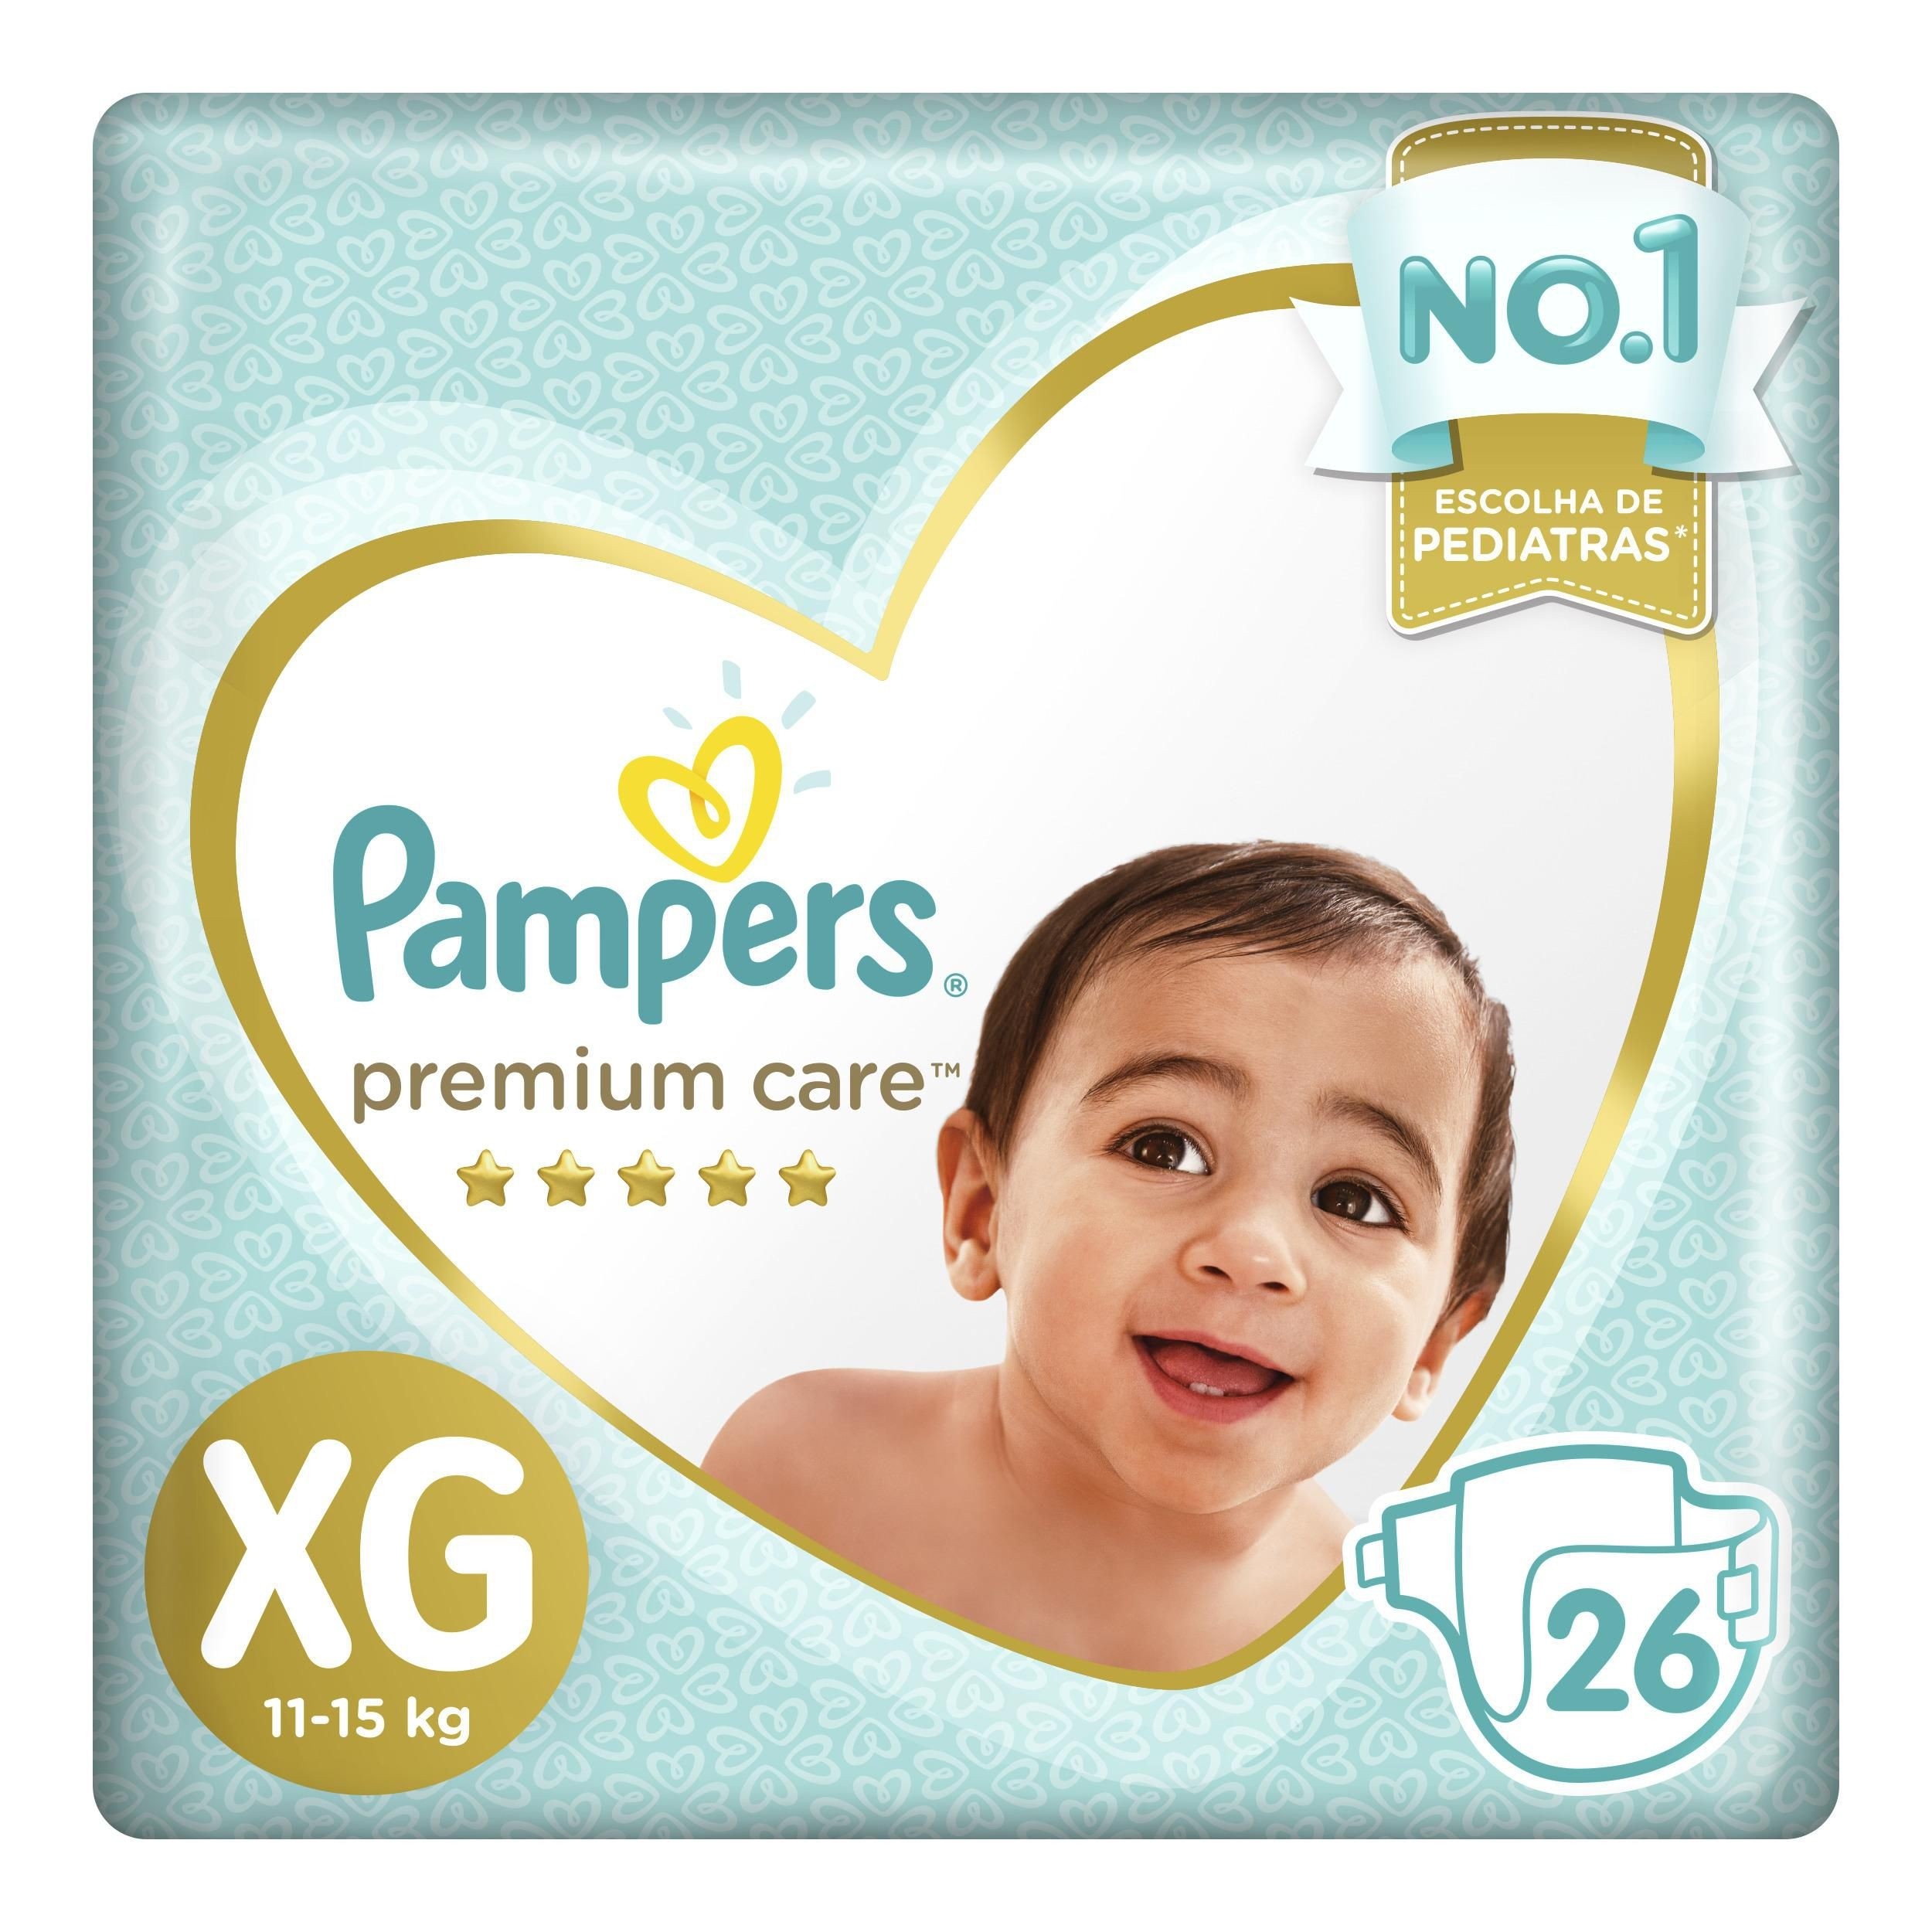 pampers vip